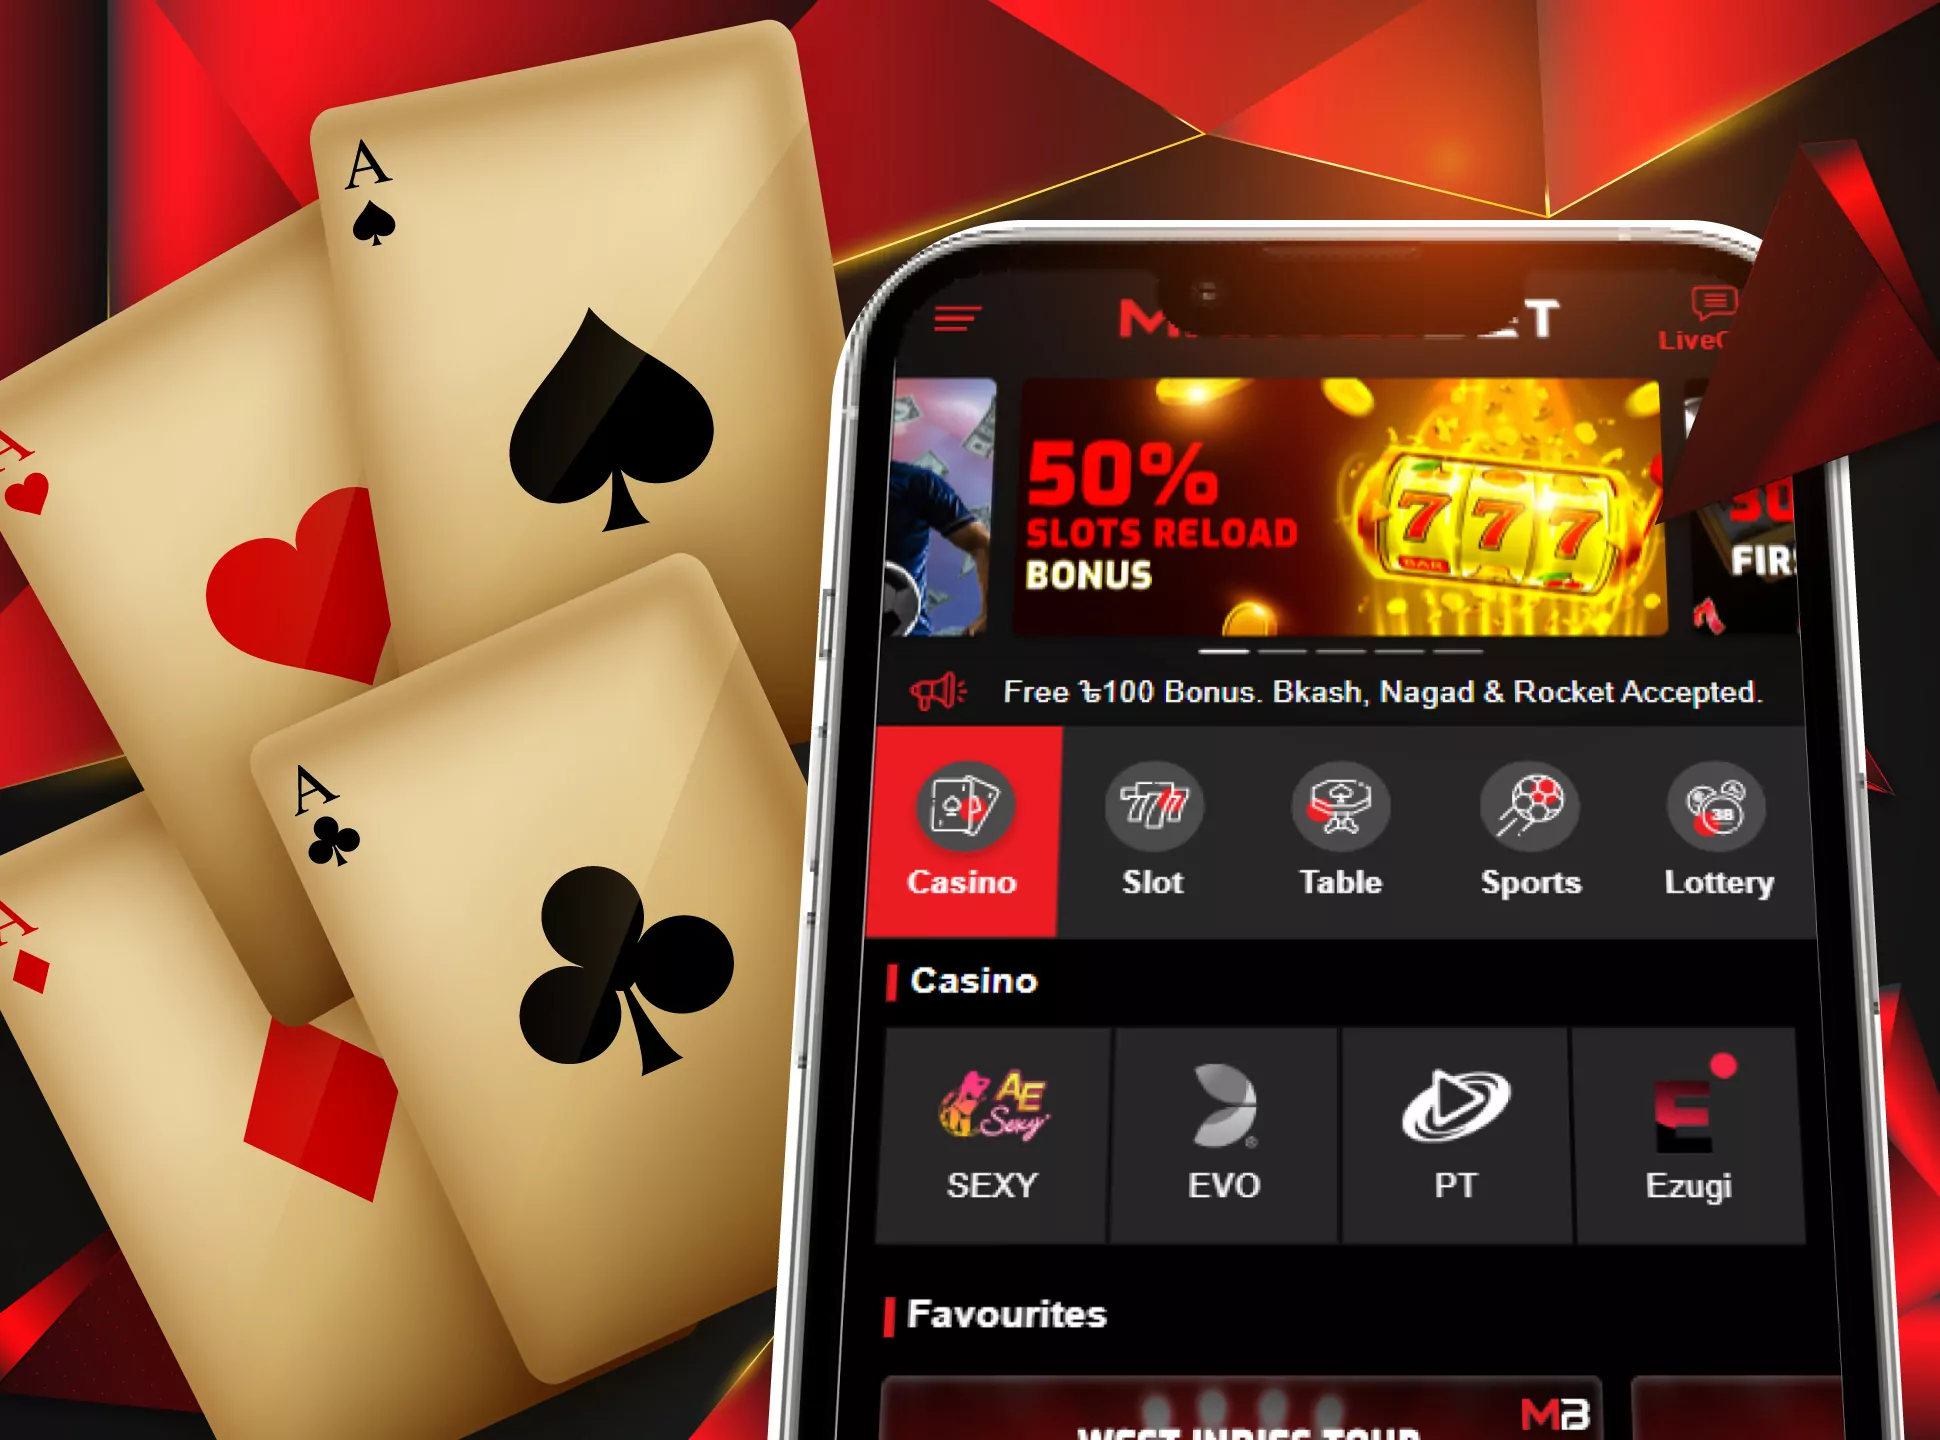 You will find all the popular casino games in the Marvelbet app.